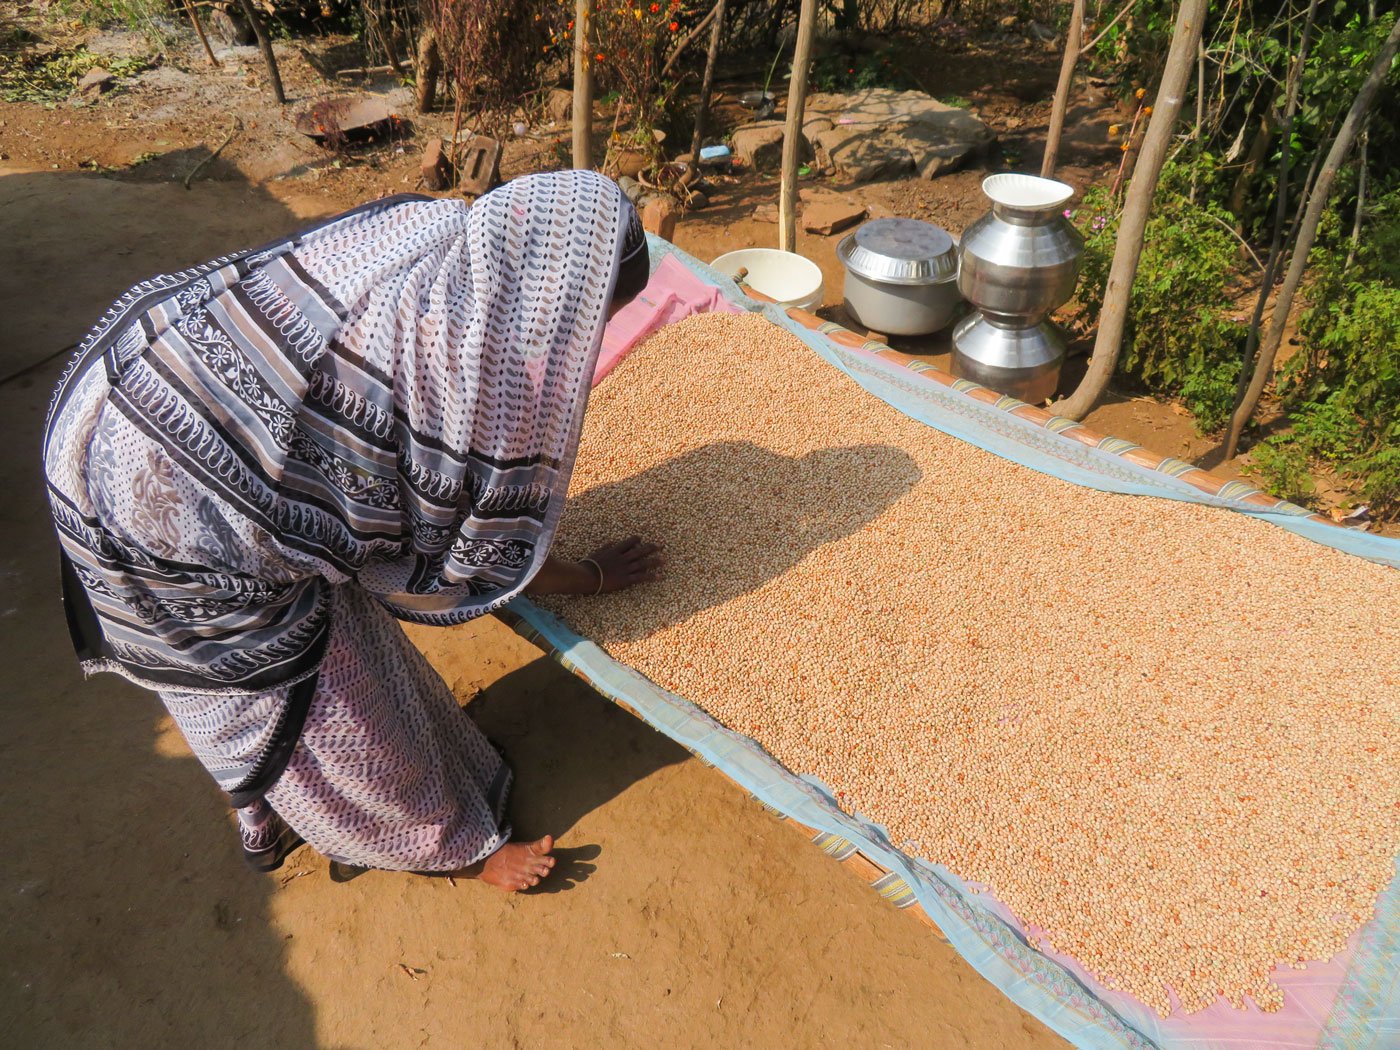 Geeta Valavi spreading kidney beans on a charpoy; she cultivates one acre in Barispada without her husband's help. His harassment over the years has left her with backaches and chronic pains

